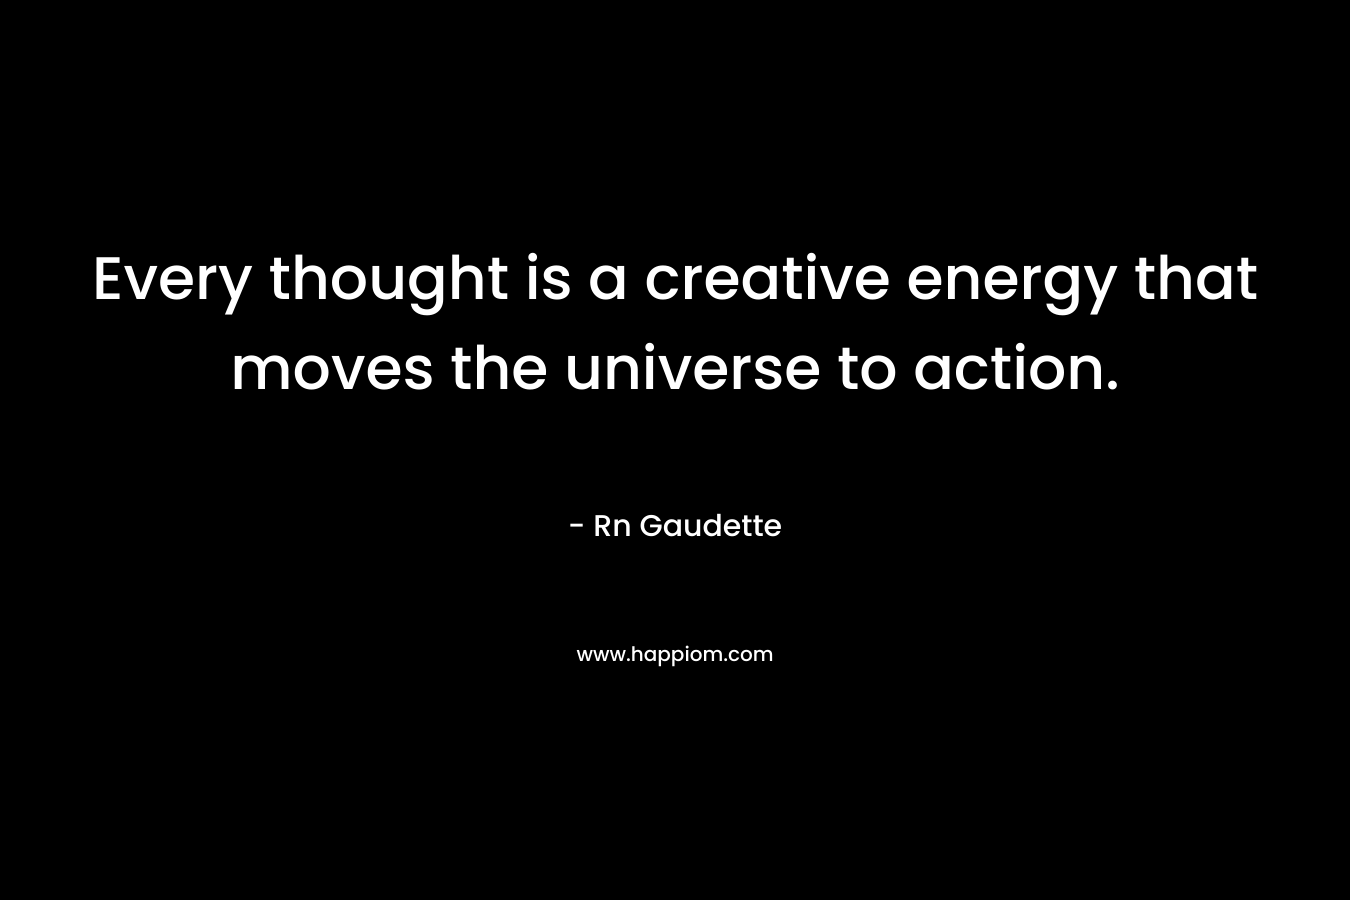 Every thought is a creative energy that moves the universe to action. – Rn Gaudette